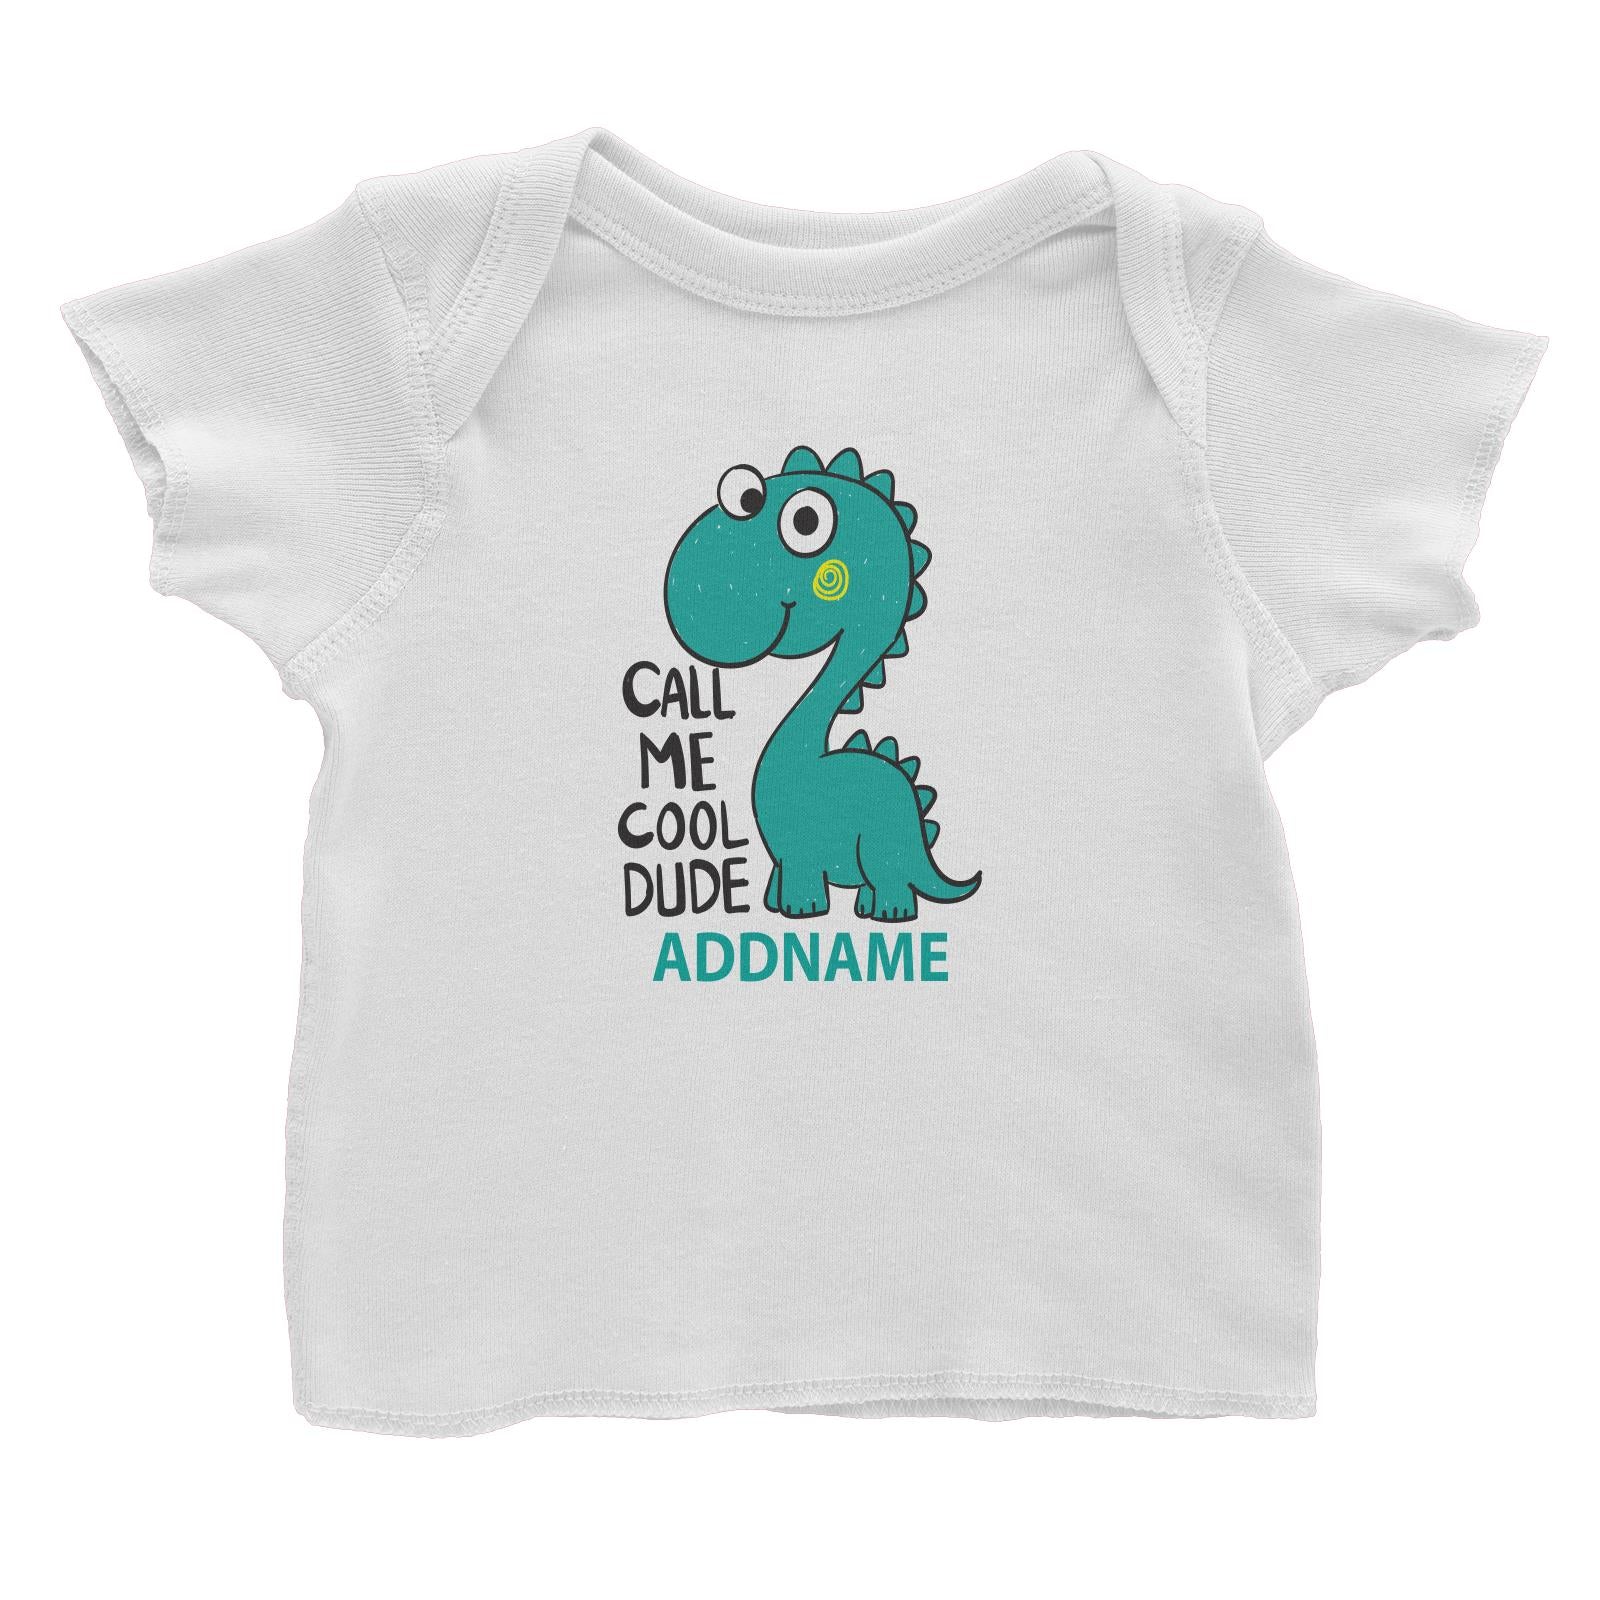 Cool Cute Dinosaur Call Me Cool Dude Addname Baby T-Shirt